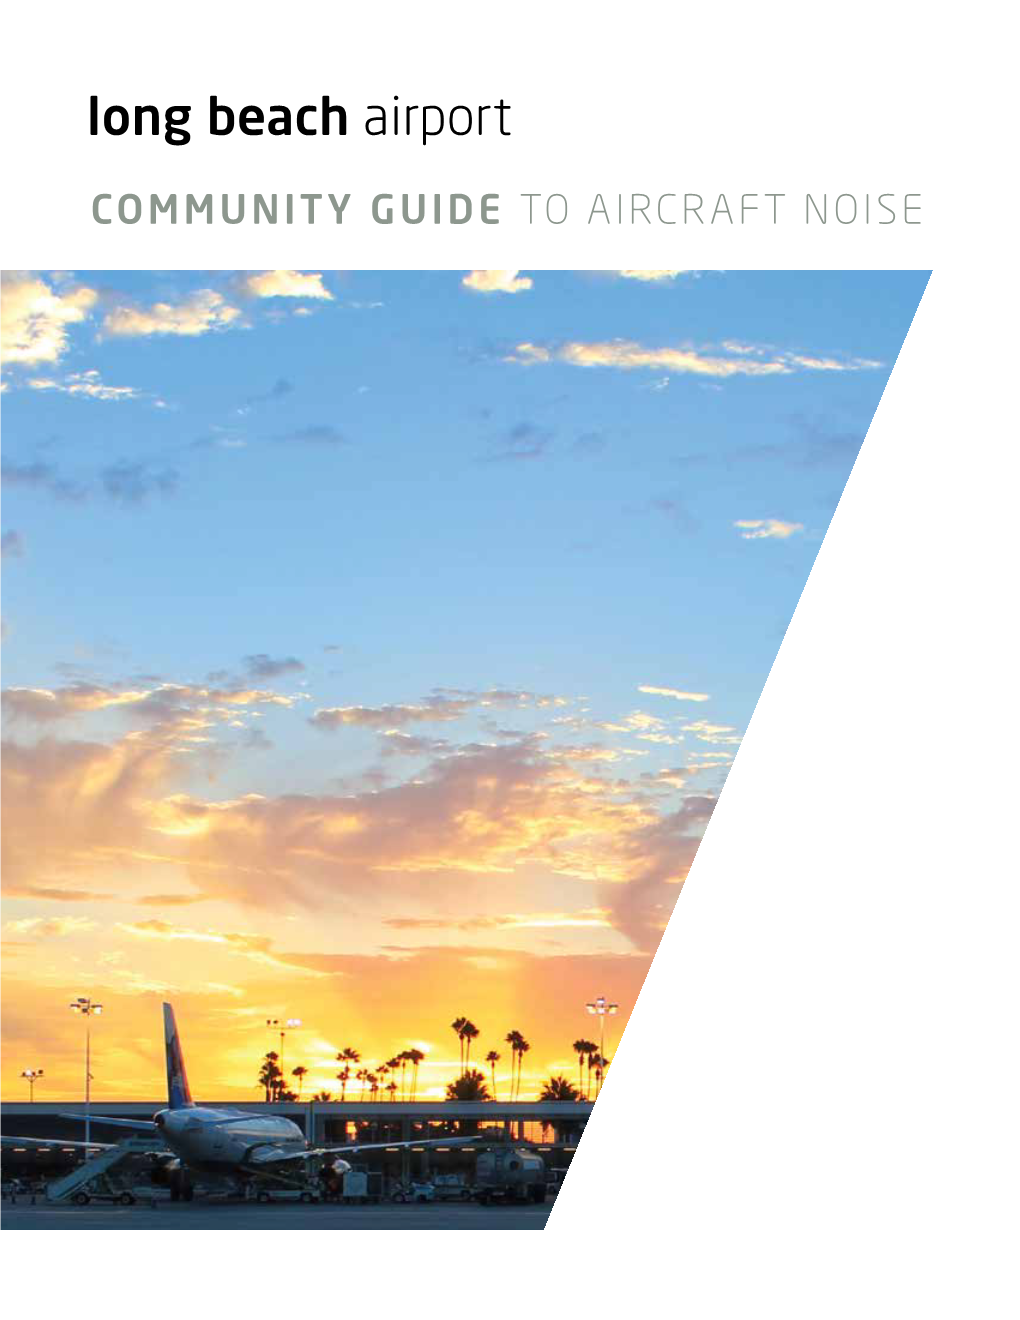 COMMUNITY GUIDE to AIRCRAFT NOISE Although We May Not Often Think About It, Air Transportation Is Very Important in Our Daily Lives